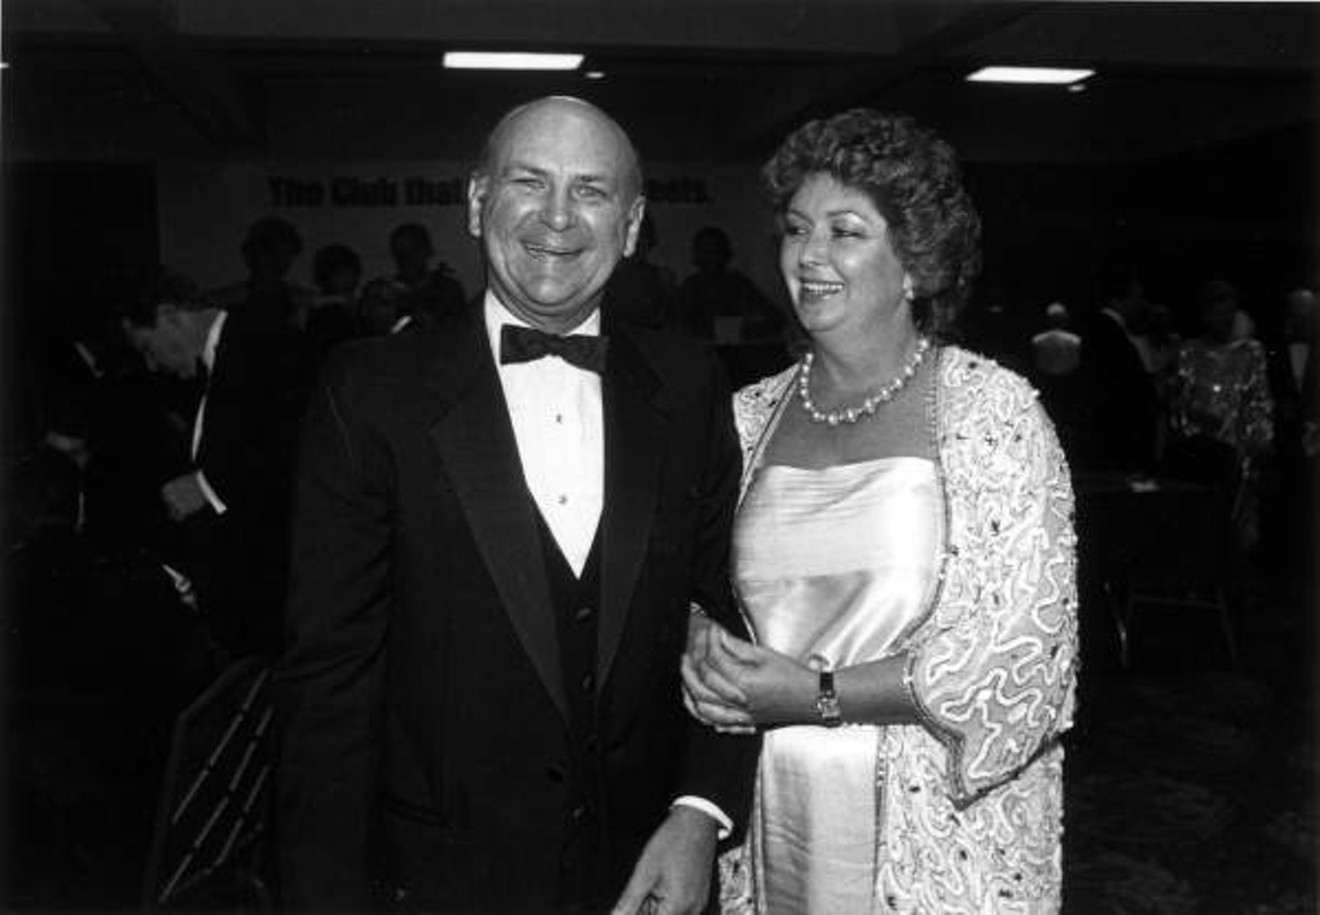 Wayne Huizenga with his wife Marti (right), who died in January 2017.